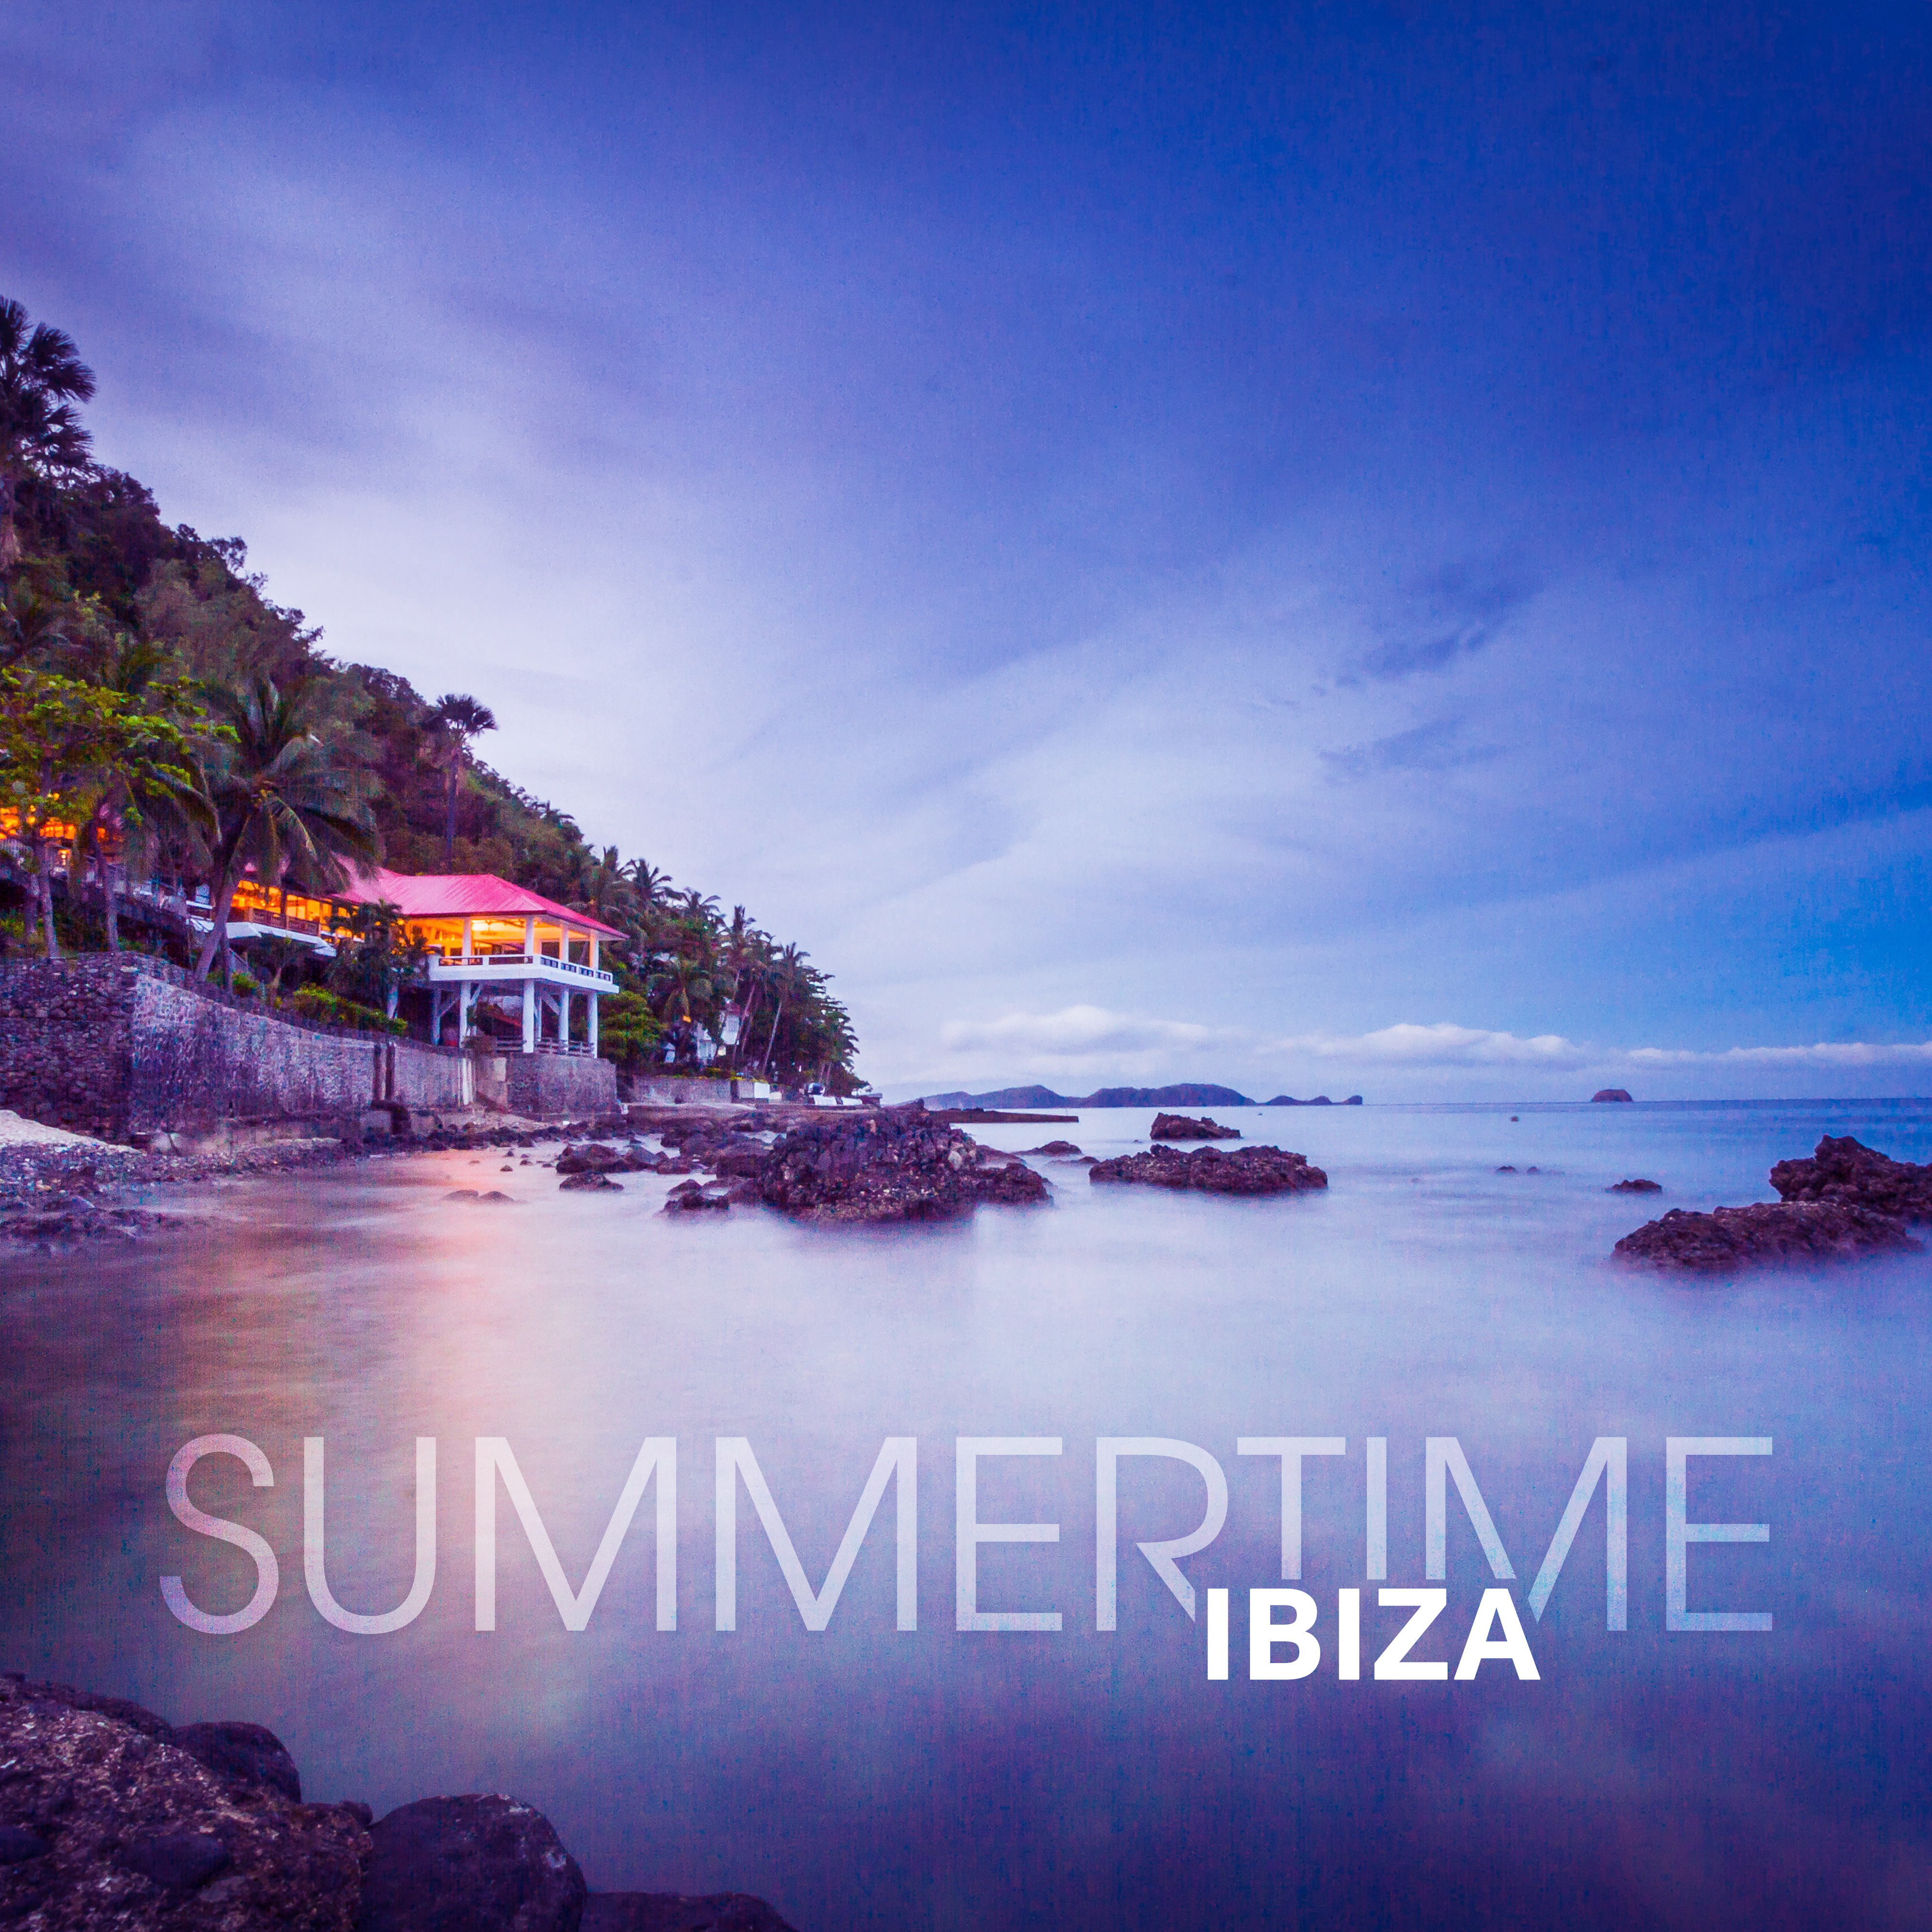 Ibiza Summertime  Sunset Chill Out, Relax, Beach Chill, Lounge Summer, Holiday Vibes, Relax Under Palms